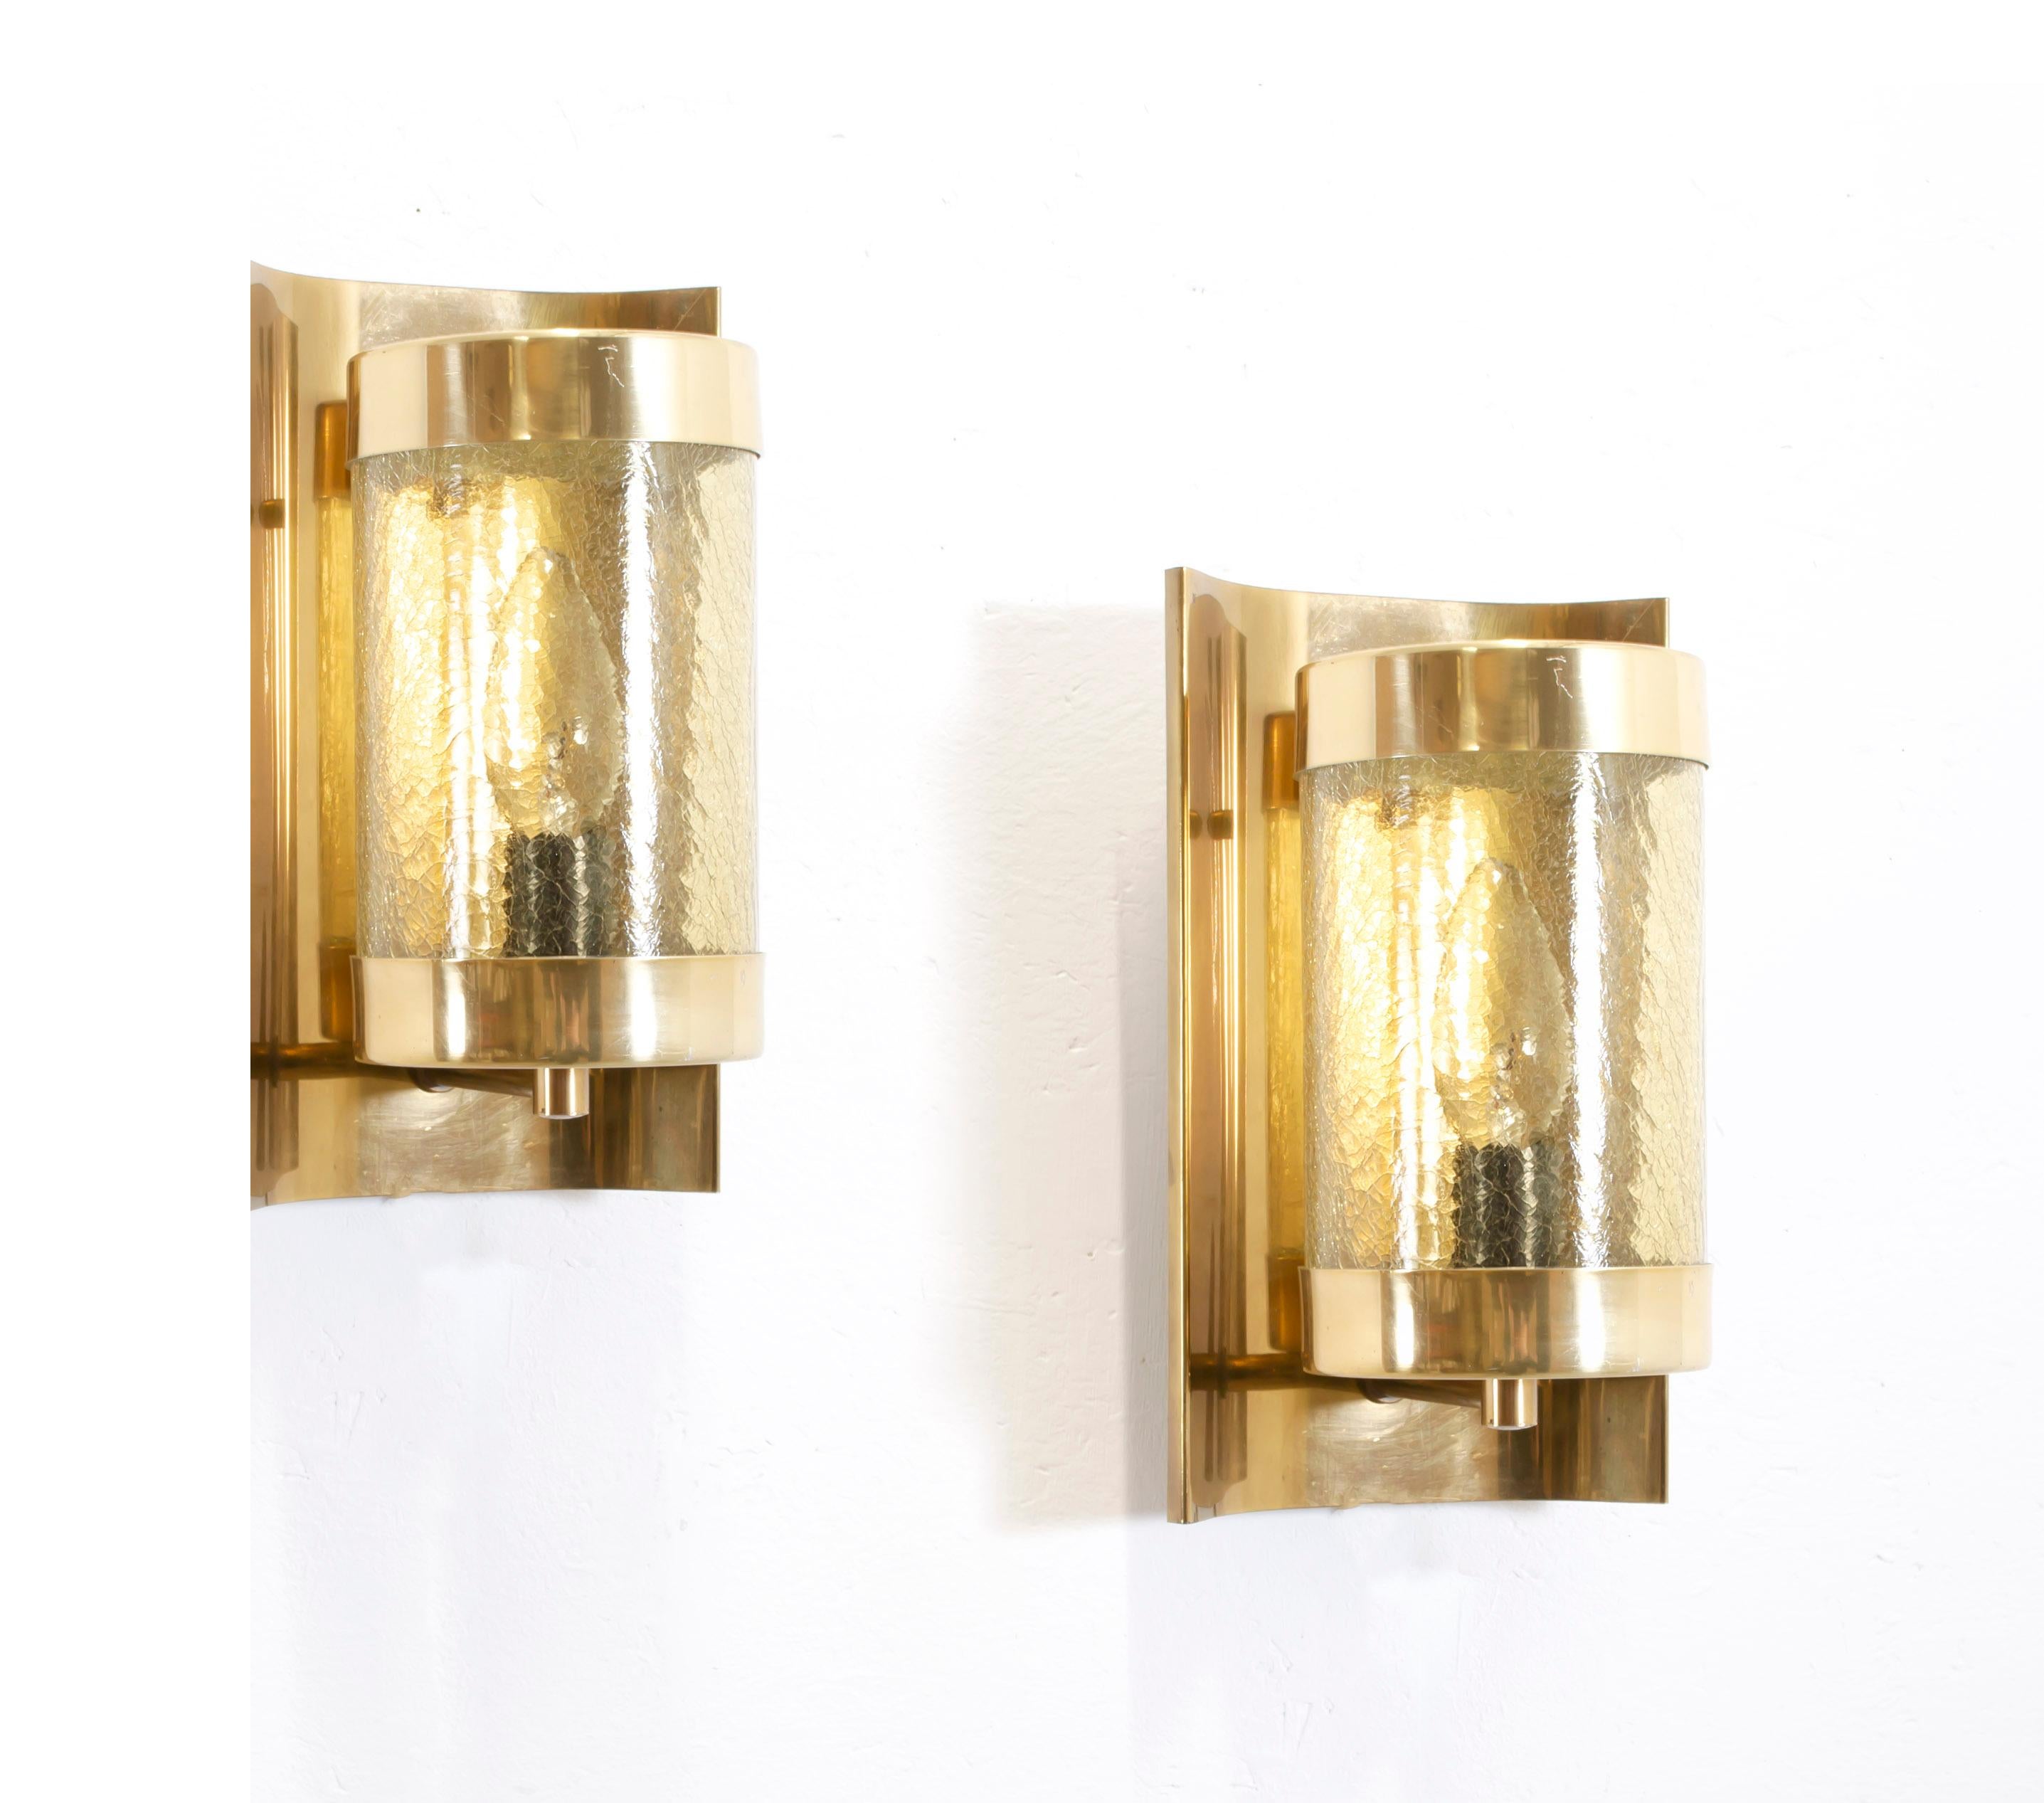 Pair of Midcentury Scandinavian Wall Lights in Brass, 1970s In Good Condition For Sale In Oslo, NO